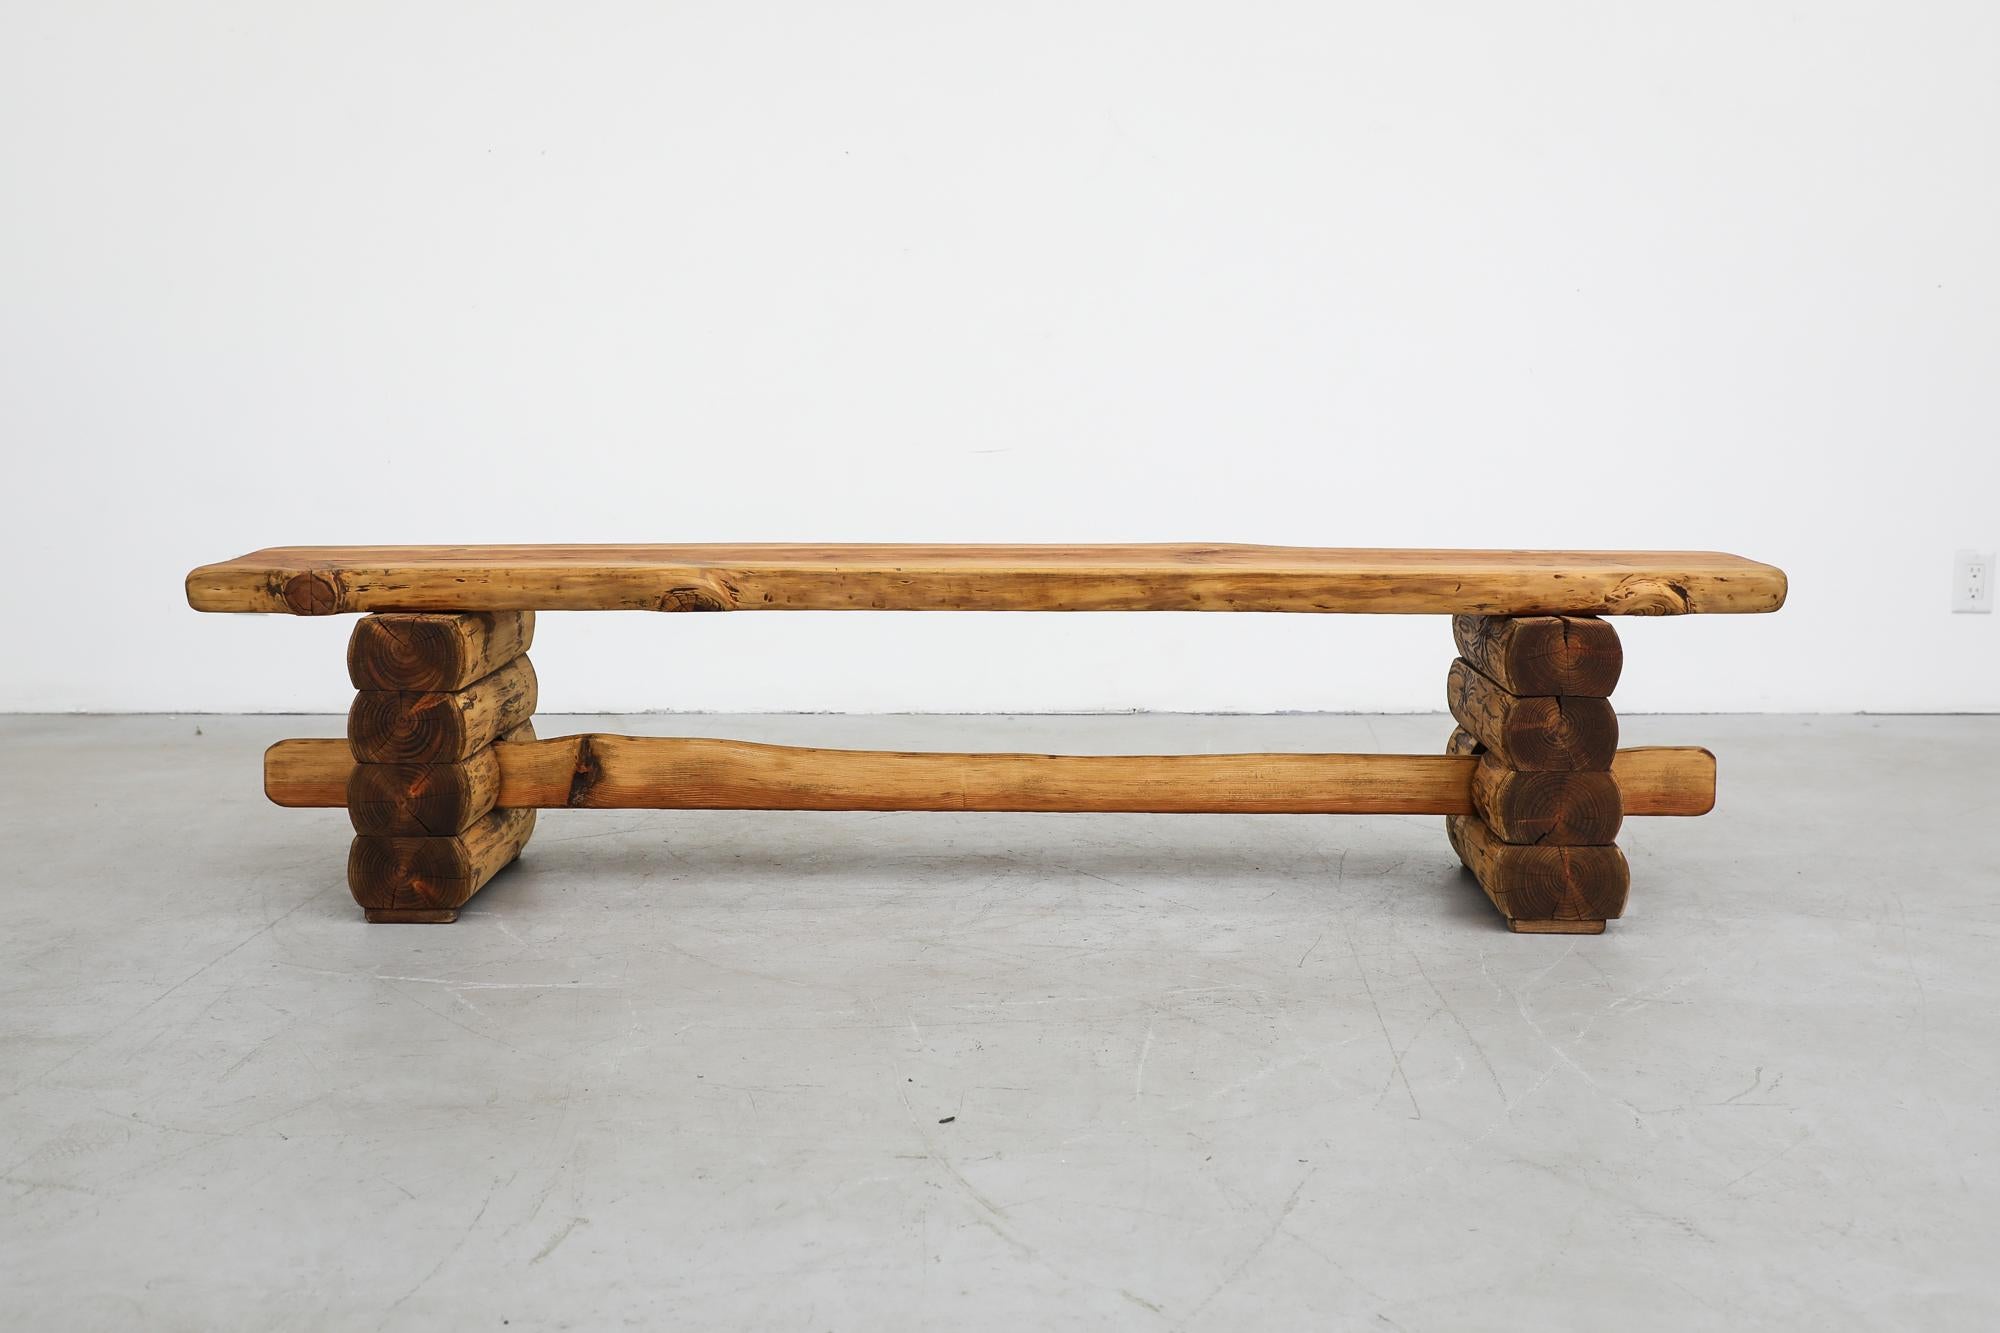 Truly massive midcentury log benches with hand-carved organic live edges, stacked log legs and a center support beam. Benches vary. Both are in original condition with visible wear including scratches. Wear is consistent with their age and use.